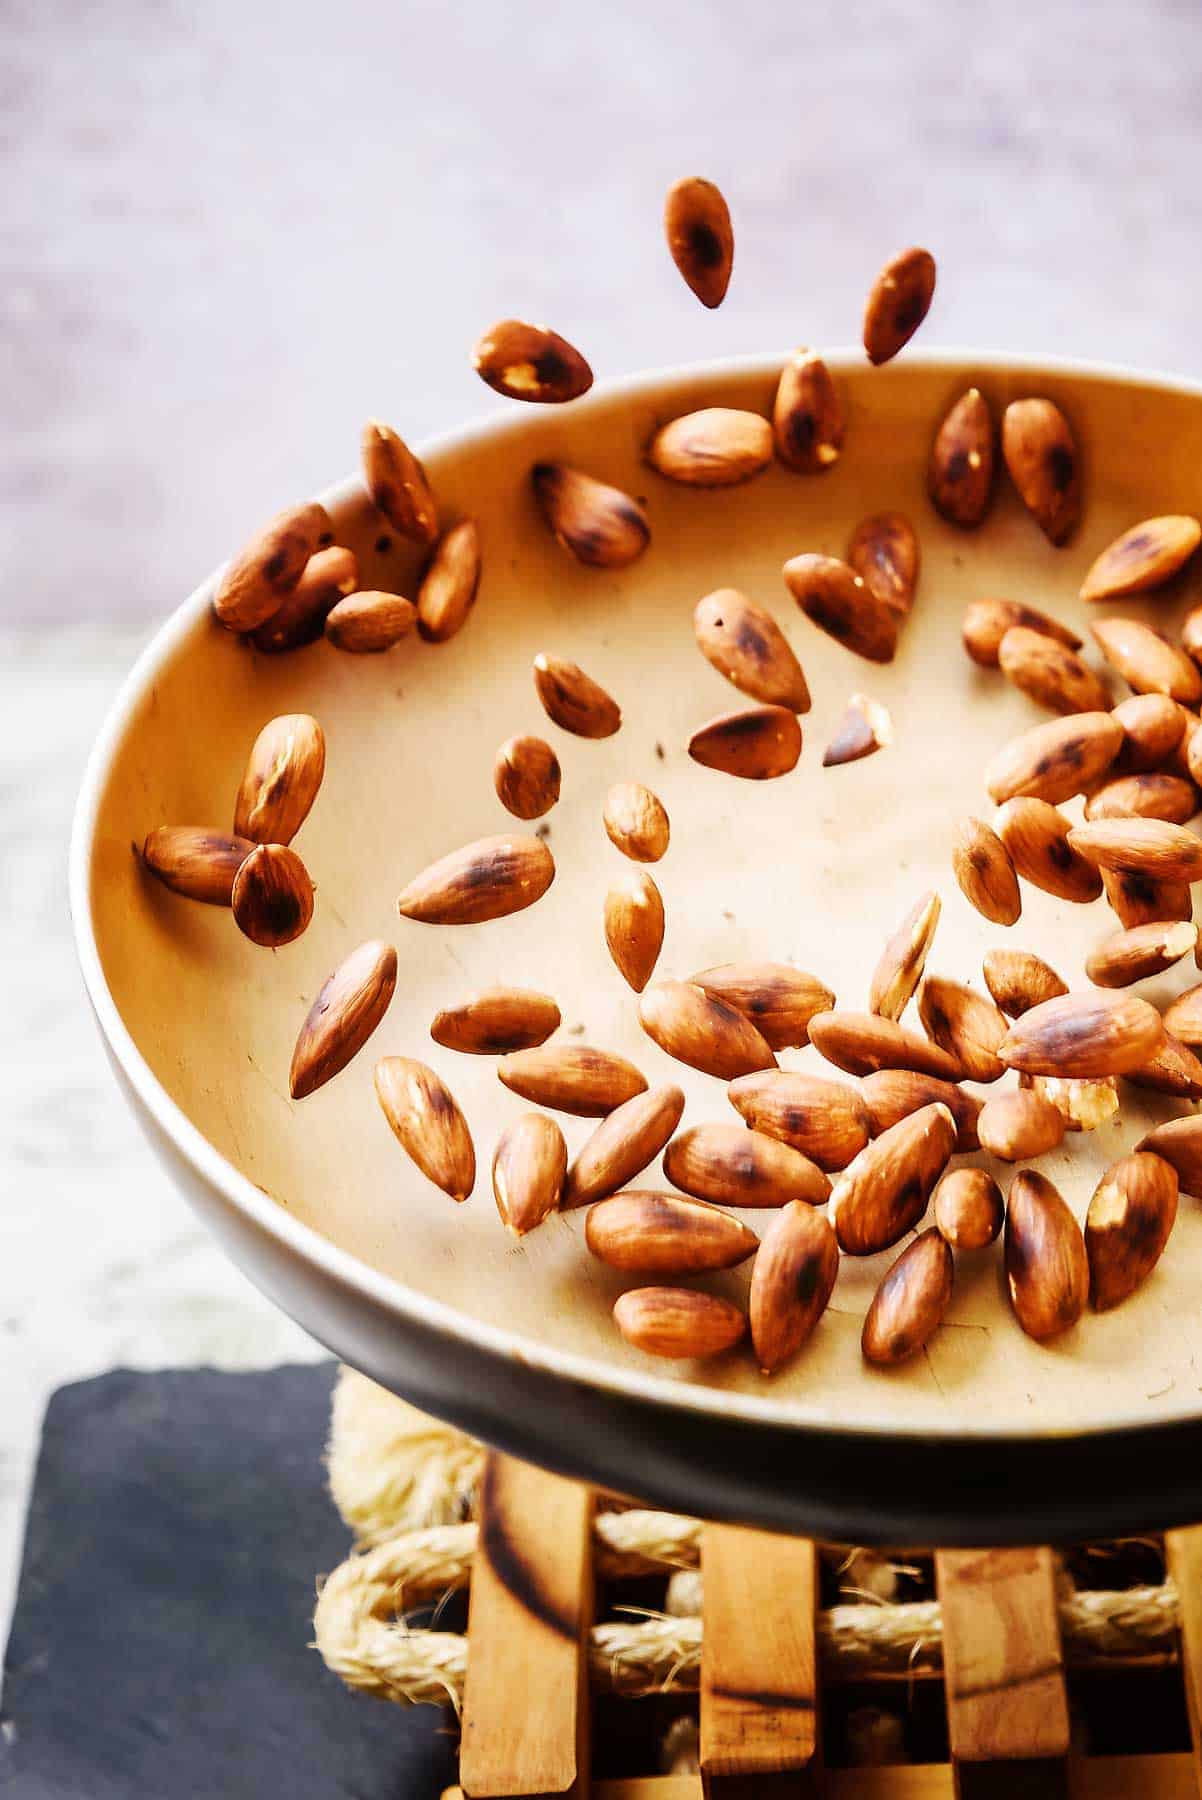 Tossing the almonds in a pan